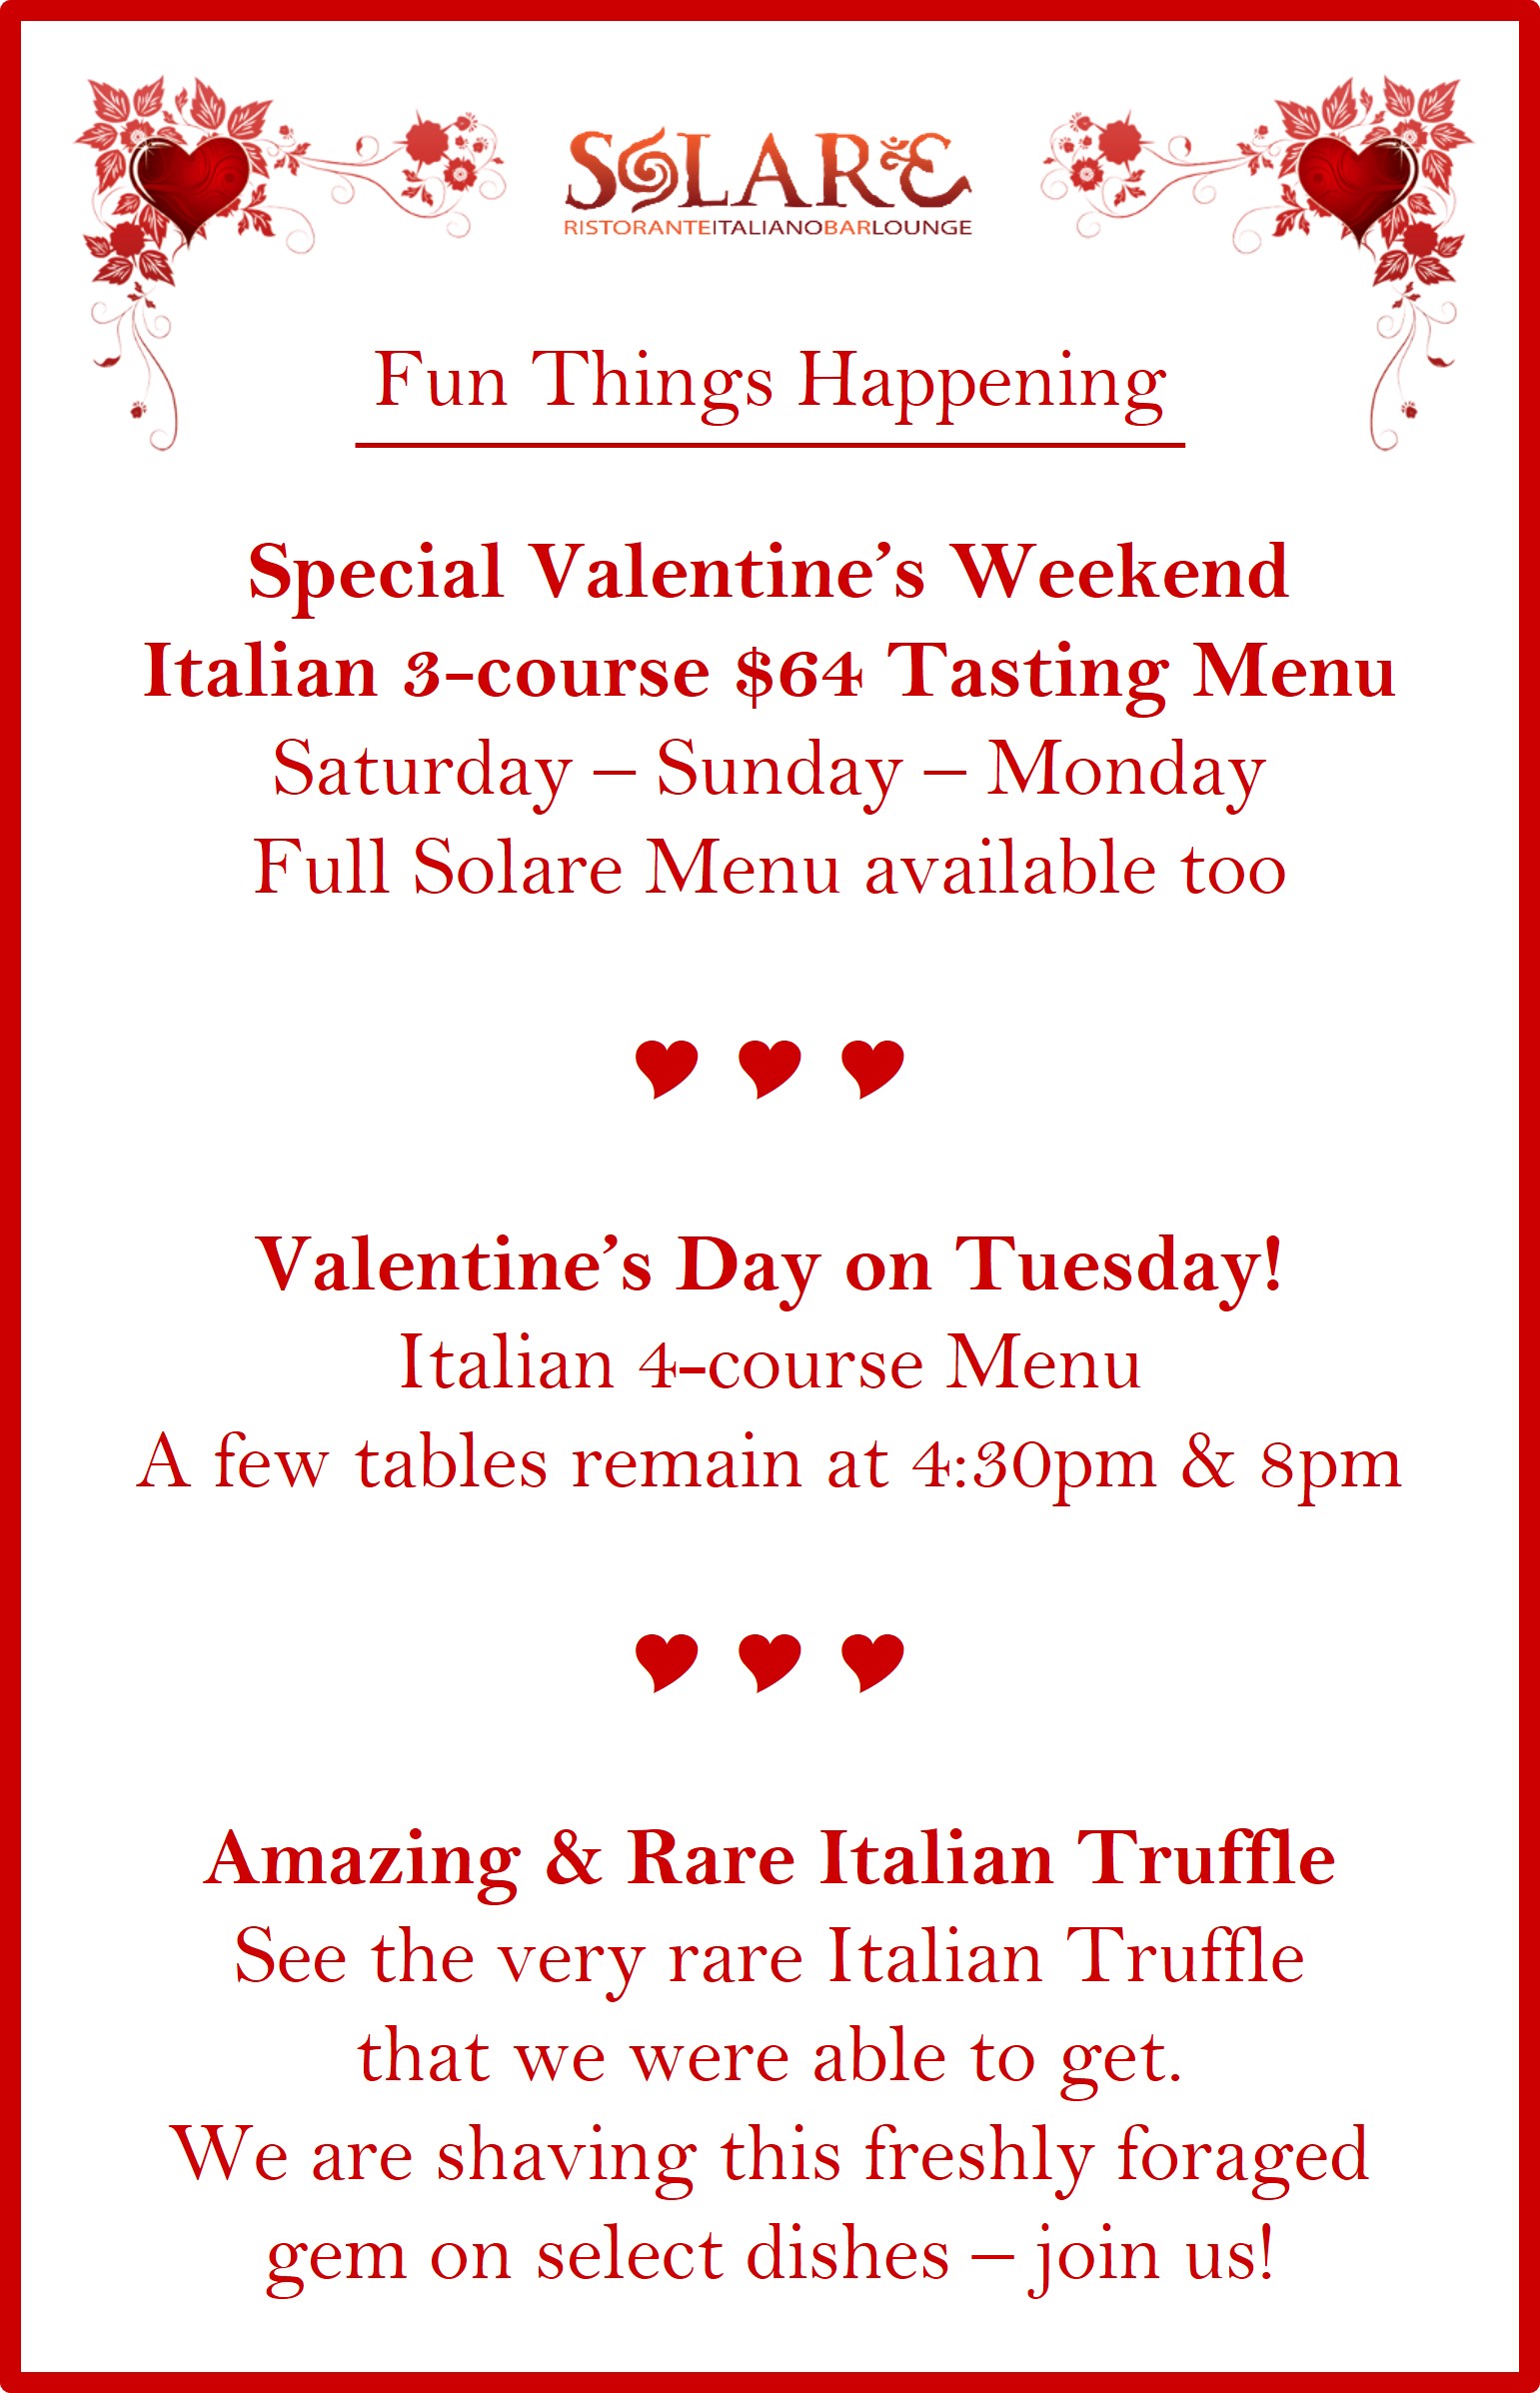 St. Valentine's Weekend at Solare!